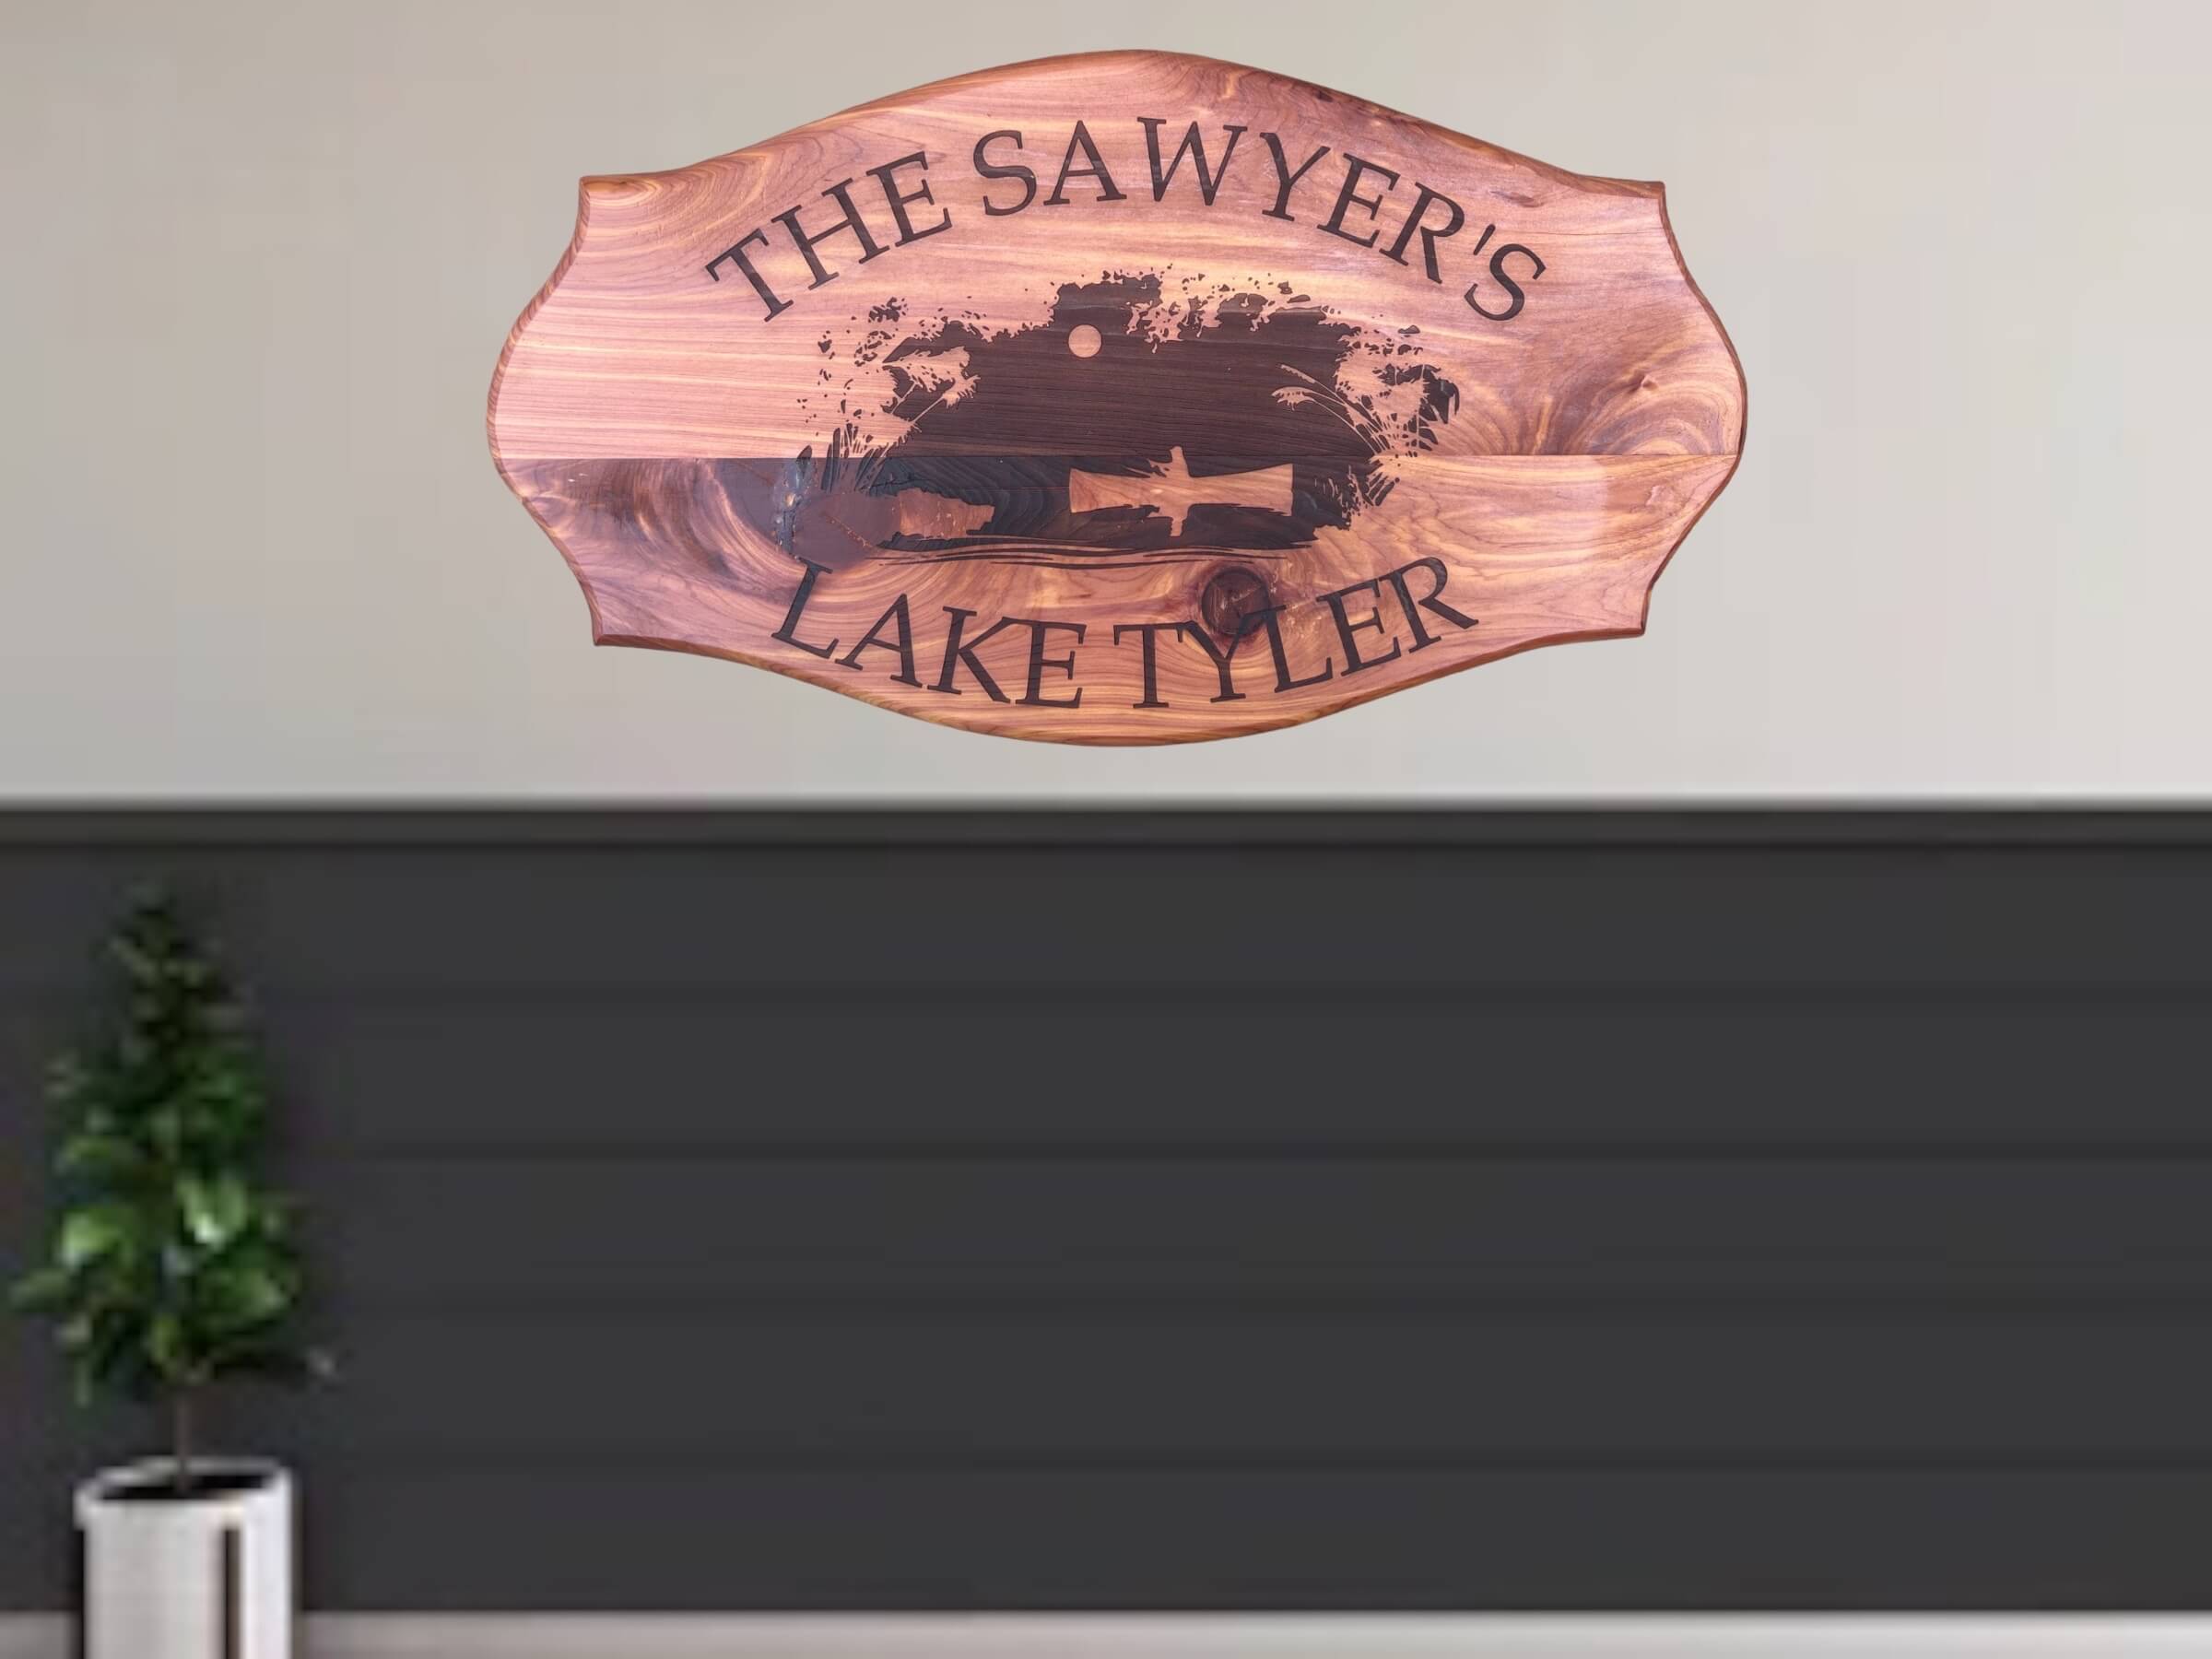 Personalized Cedar Lake House Wall Art" Description: A personalized wall art piece for your lake house, crafted from cedar wood. The center of the sign displays a laser-engraved image of a man fishing in a small boat.